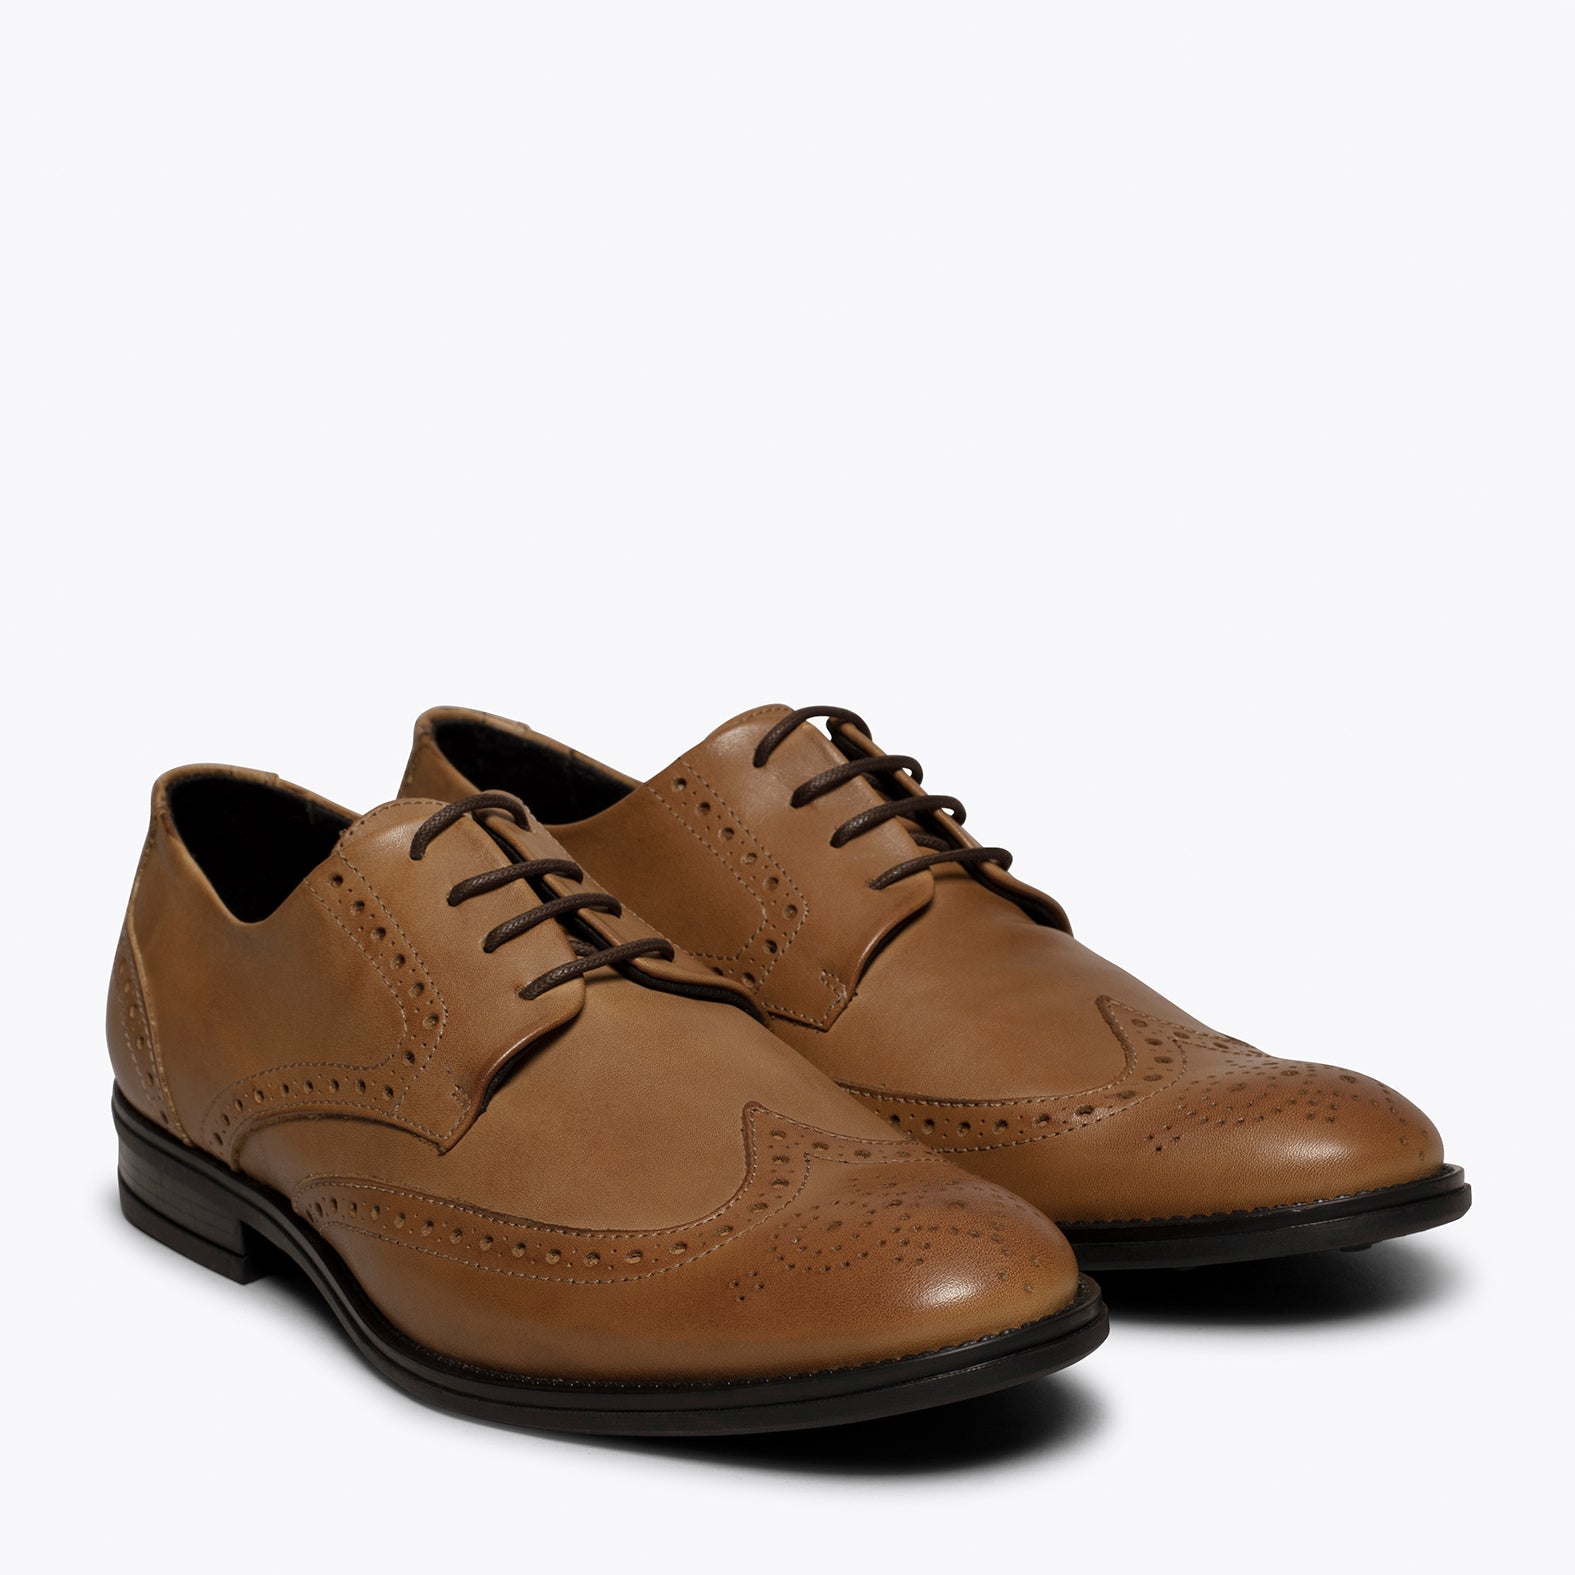 OXFORD - Chaussure homme CAMEL avec coupe anglaise